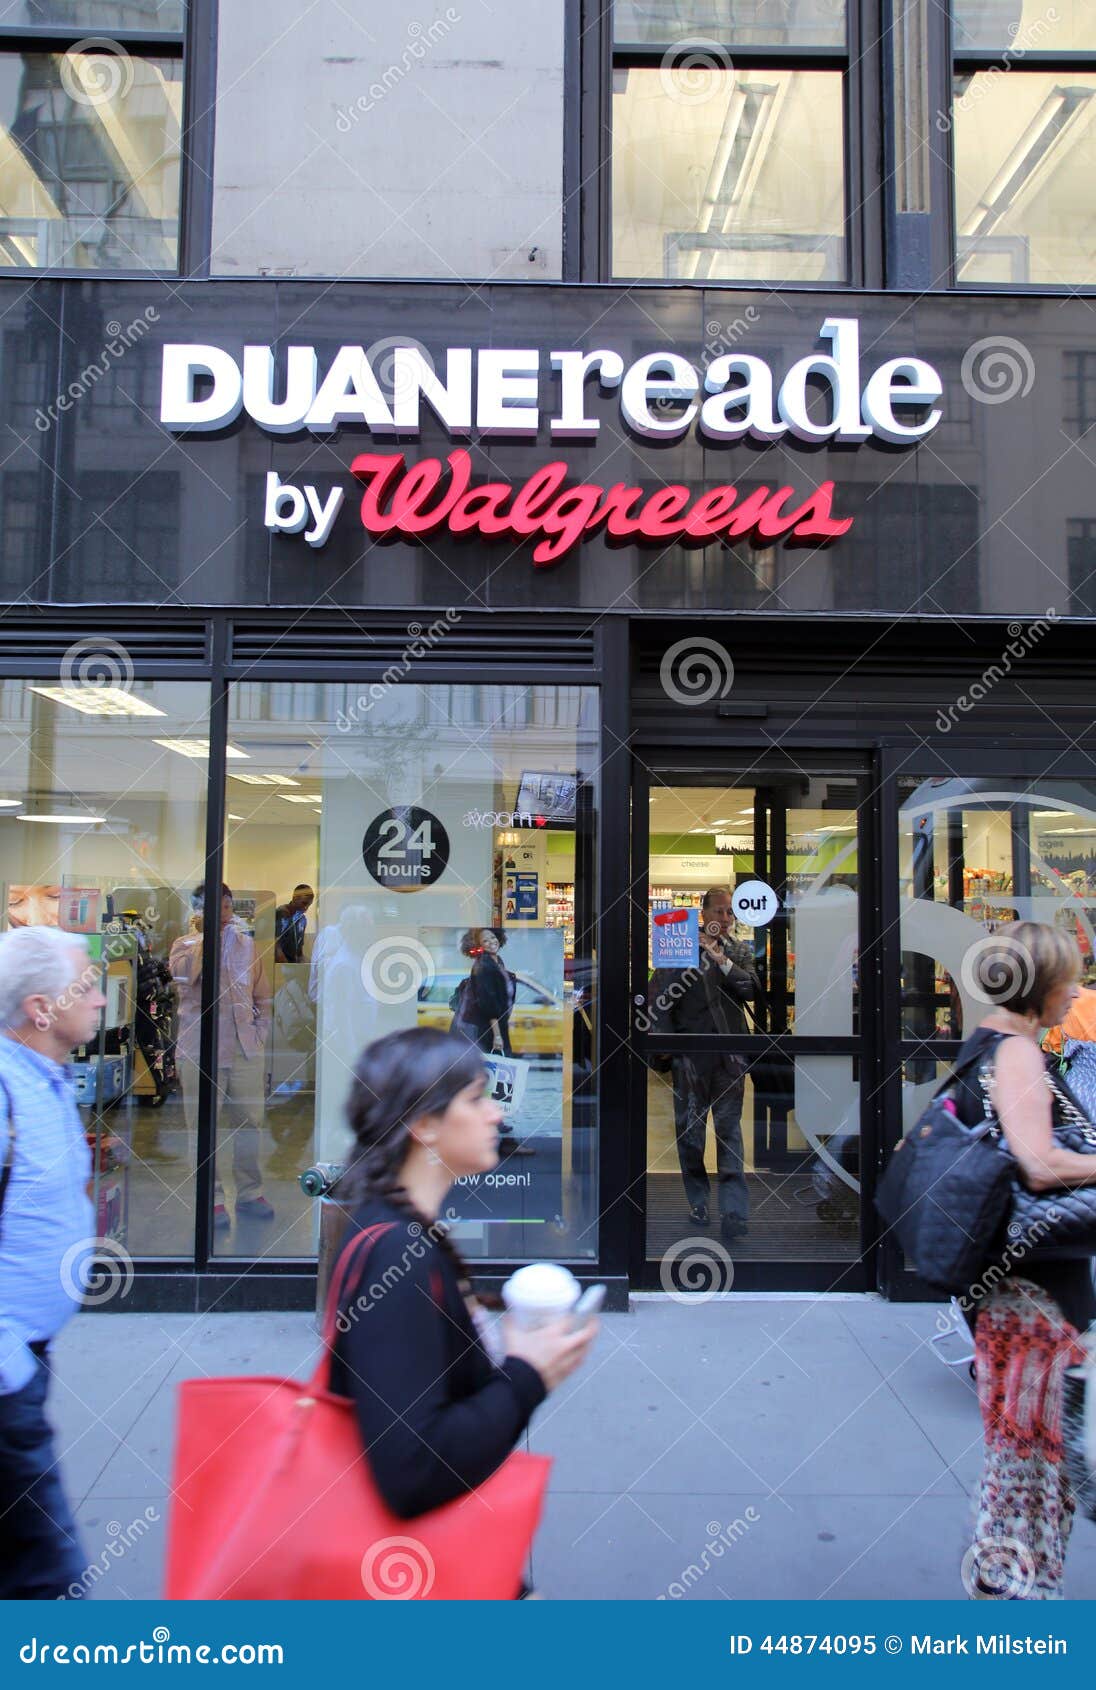 The Duane Reade App Simplifies Shopping in New York | mama goes BAM